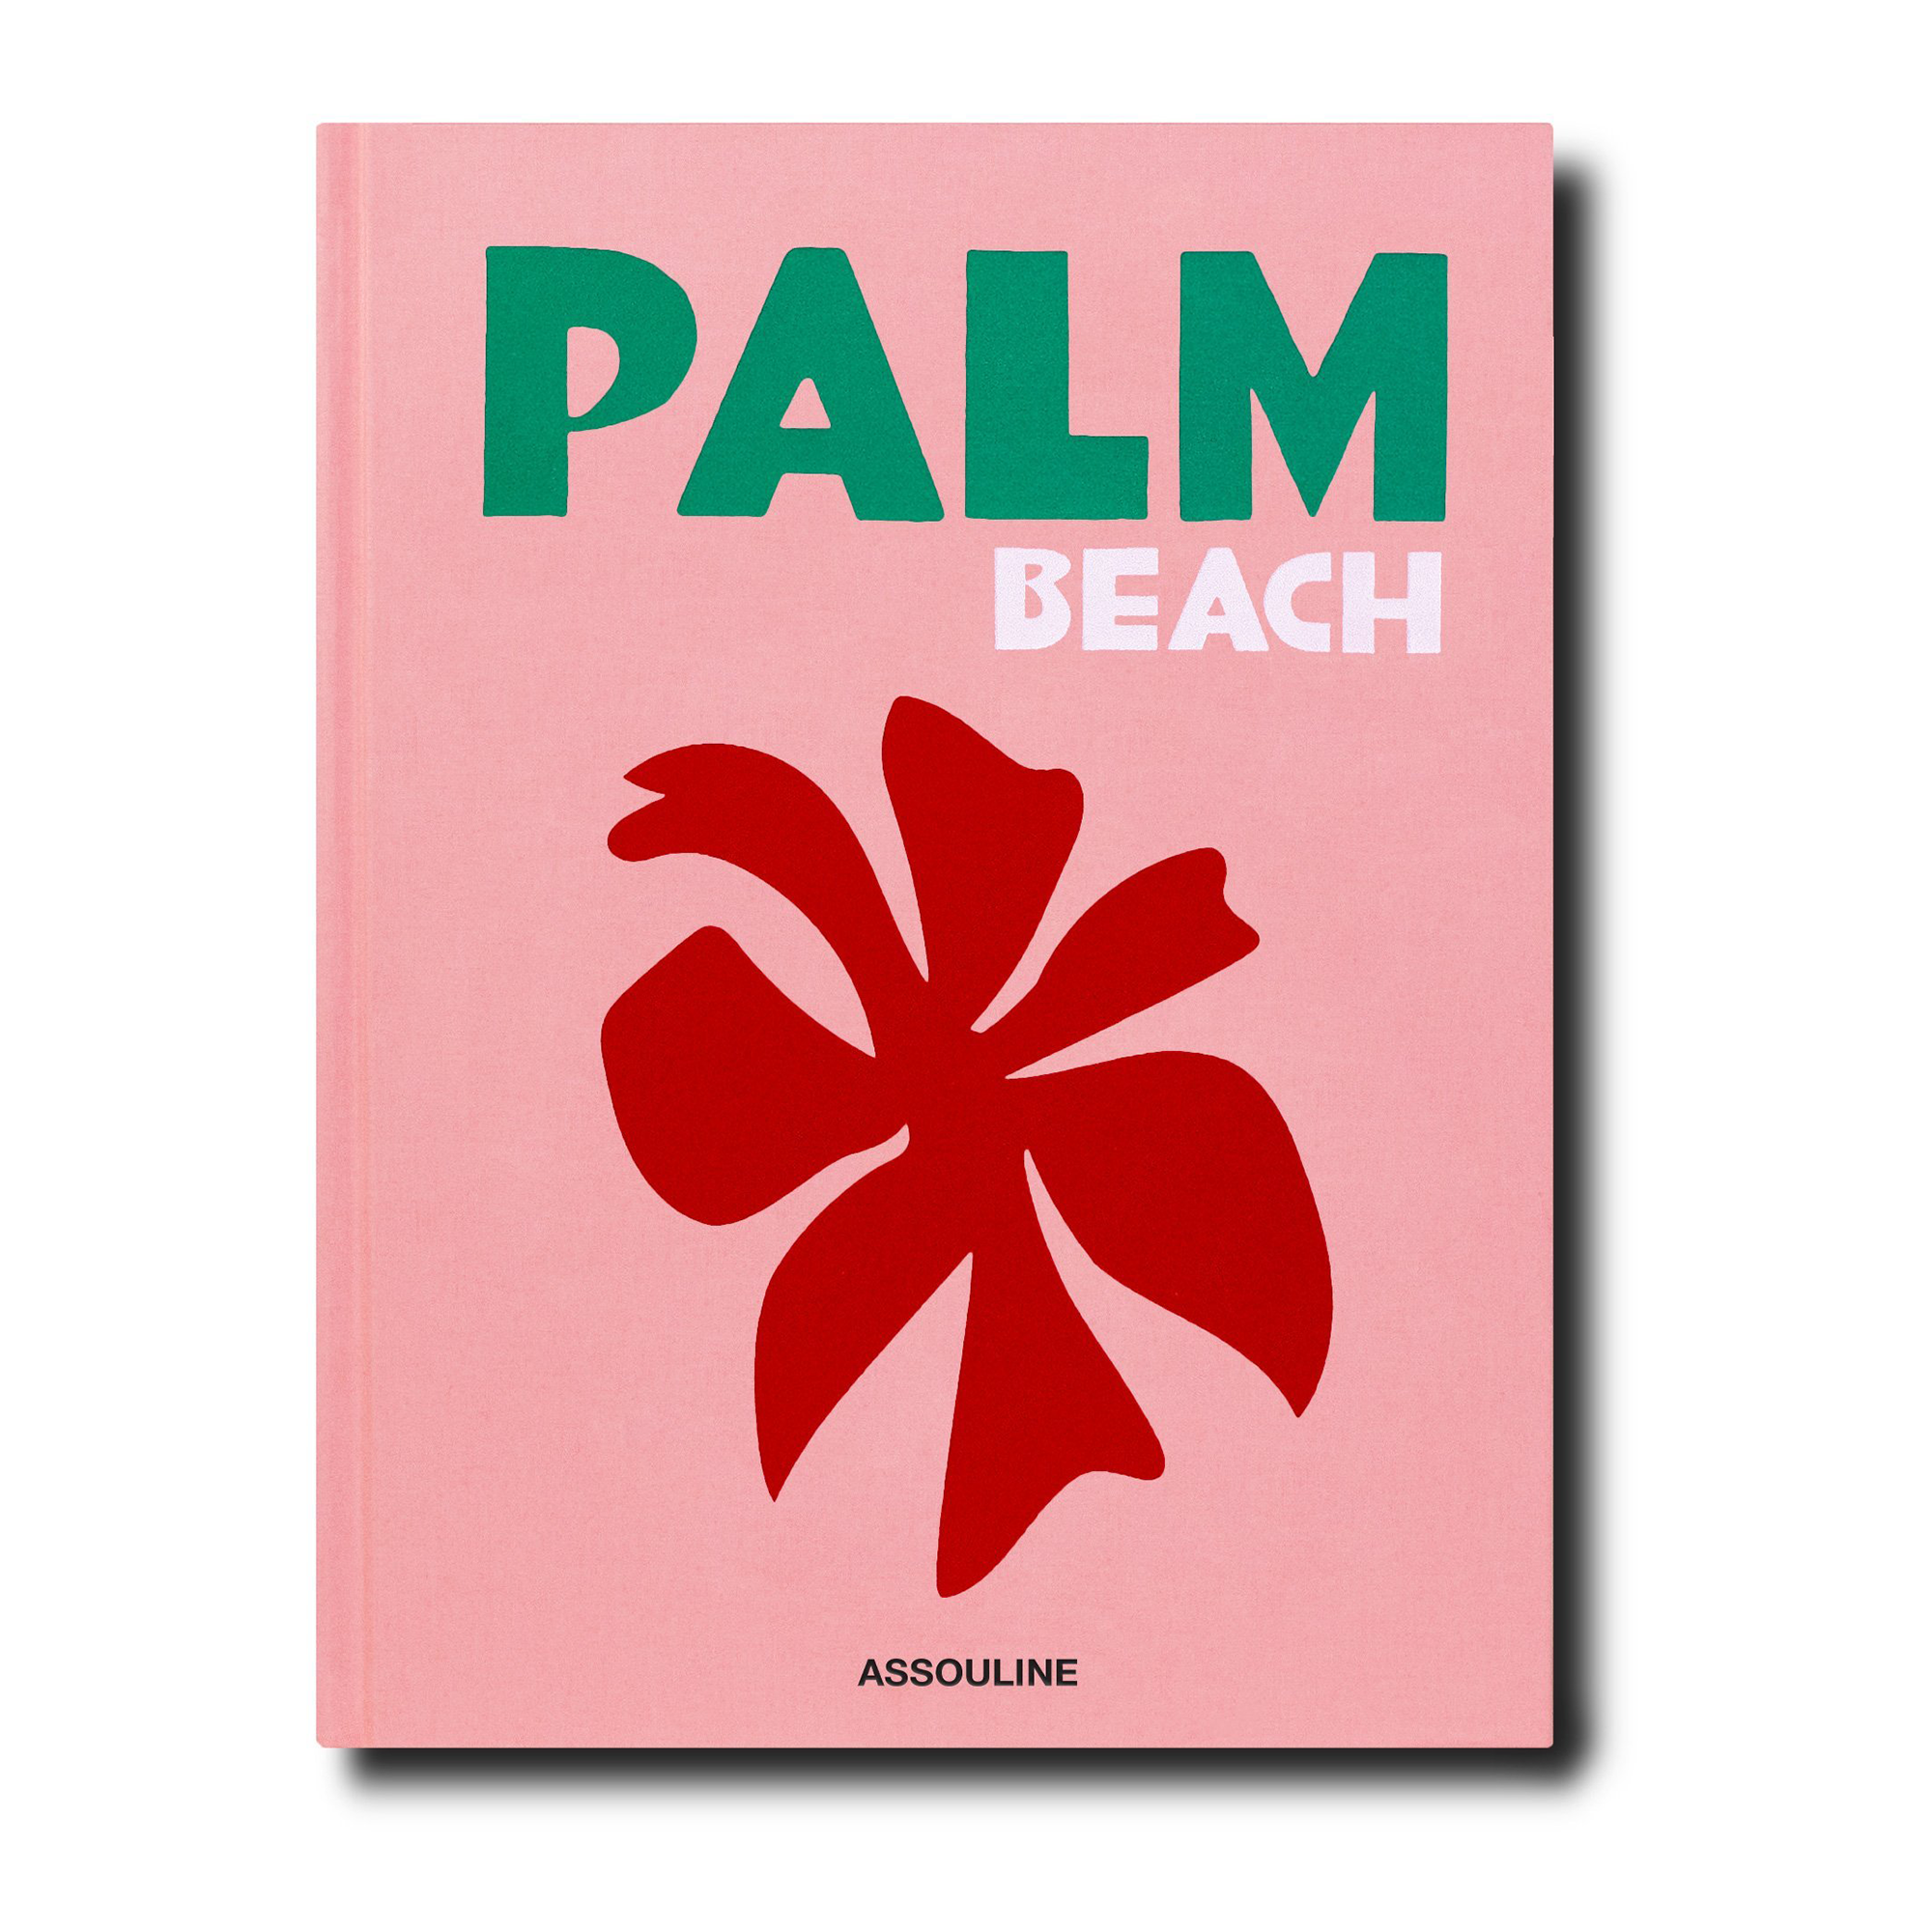 In the early 1900s, oil baron Henry Morrison Flagler developed a luxury resort community on Florida's Southern coast, building a railroad and hotels to attract elite families. This area eventually became a famous destination, hosting royalty and movie stars. In this book with a pink cover featuring a summer design and red palm, that will refresh your interior, Aerin Lauder explores Palm Beach, sharing her favorite spots and the area's history.